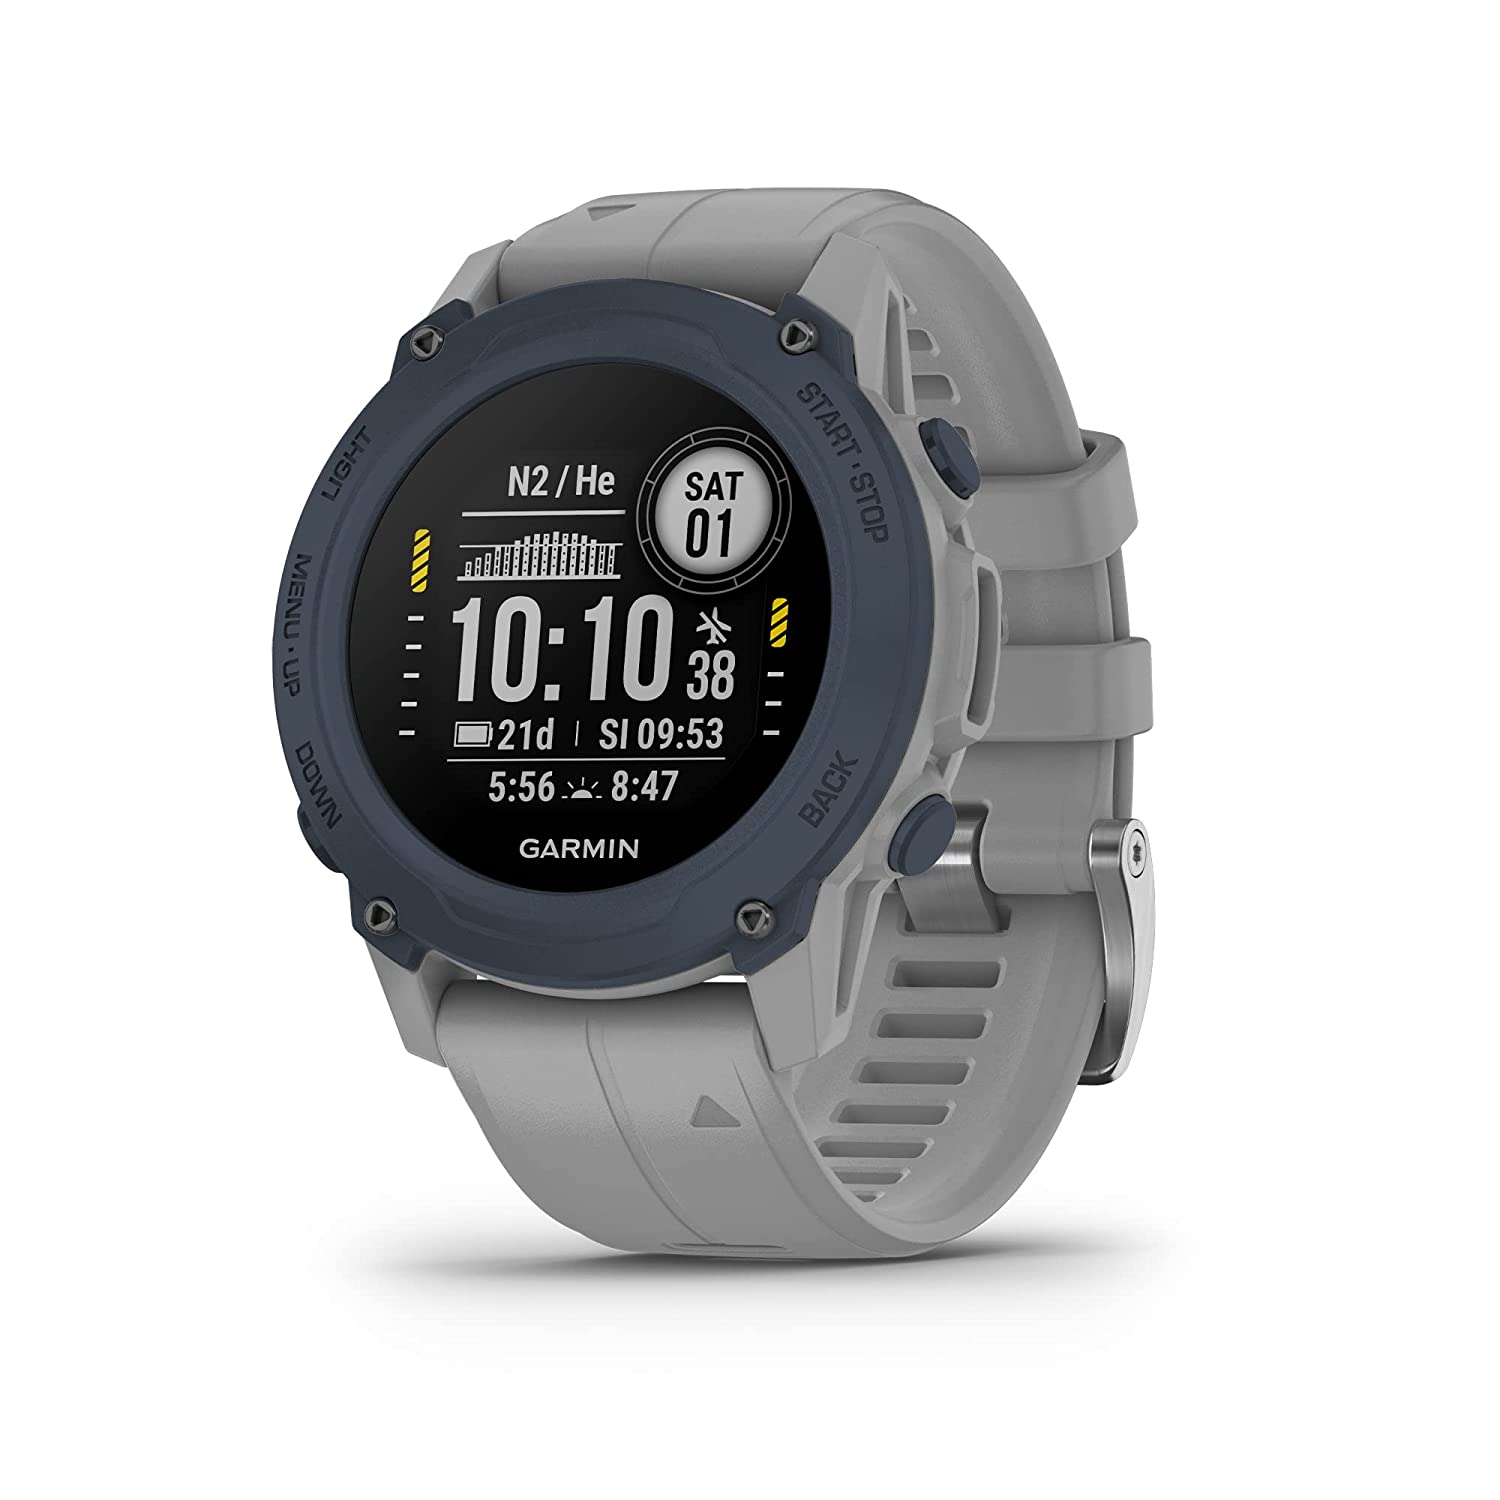 Garmin - Descent G1 Rugged Diving Smartwatch, Multiple Dive Modes, Activity Tracking, Powder Gray